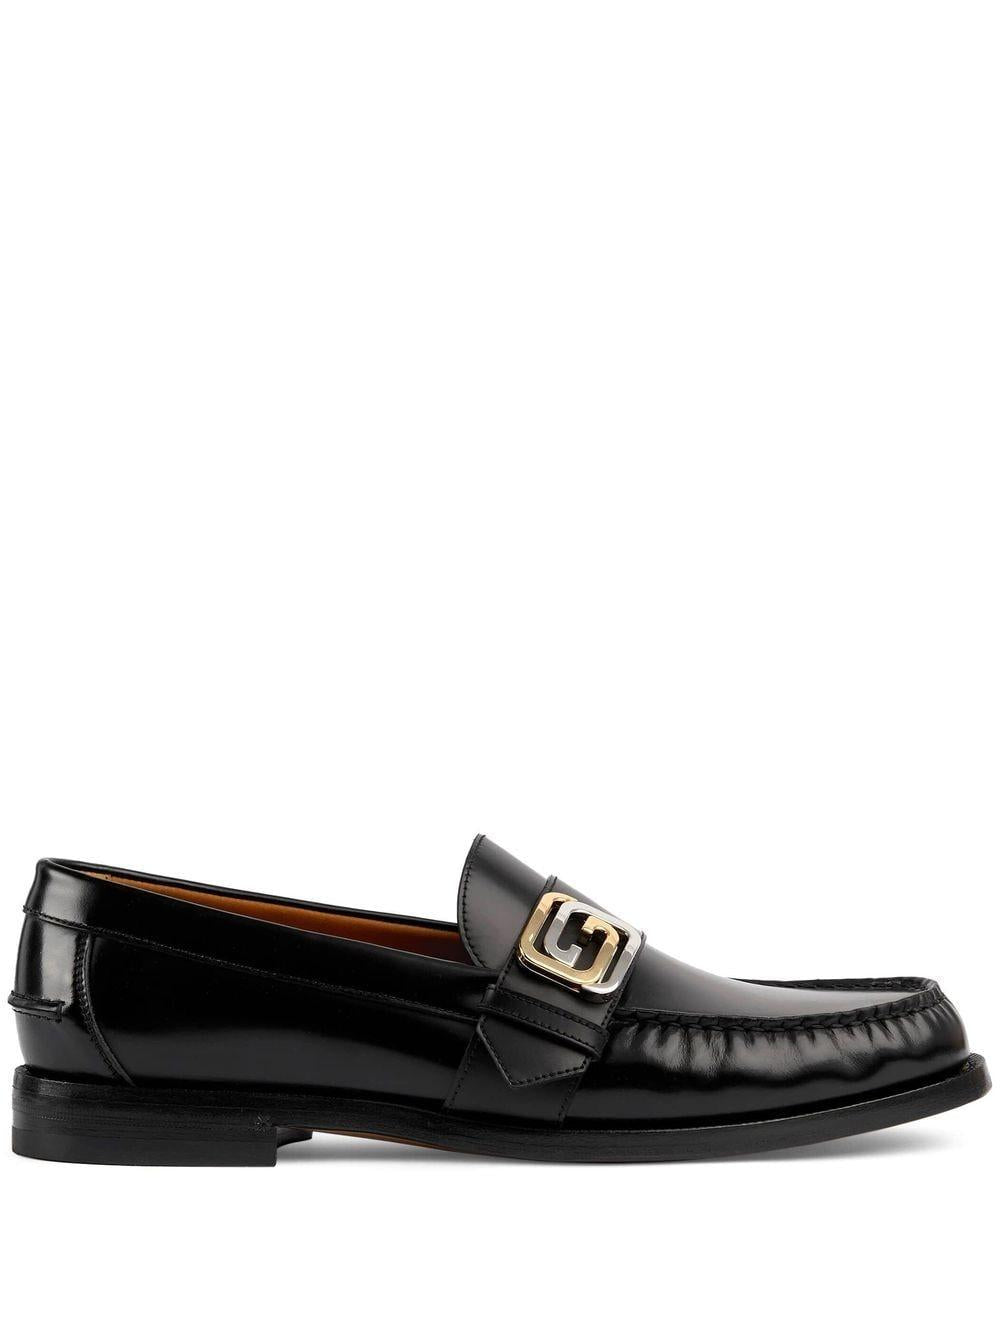 GUCCI Black Moccasin Leather Lace-Up Shoes for Men